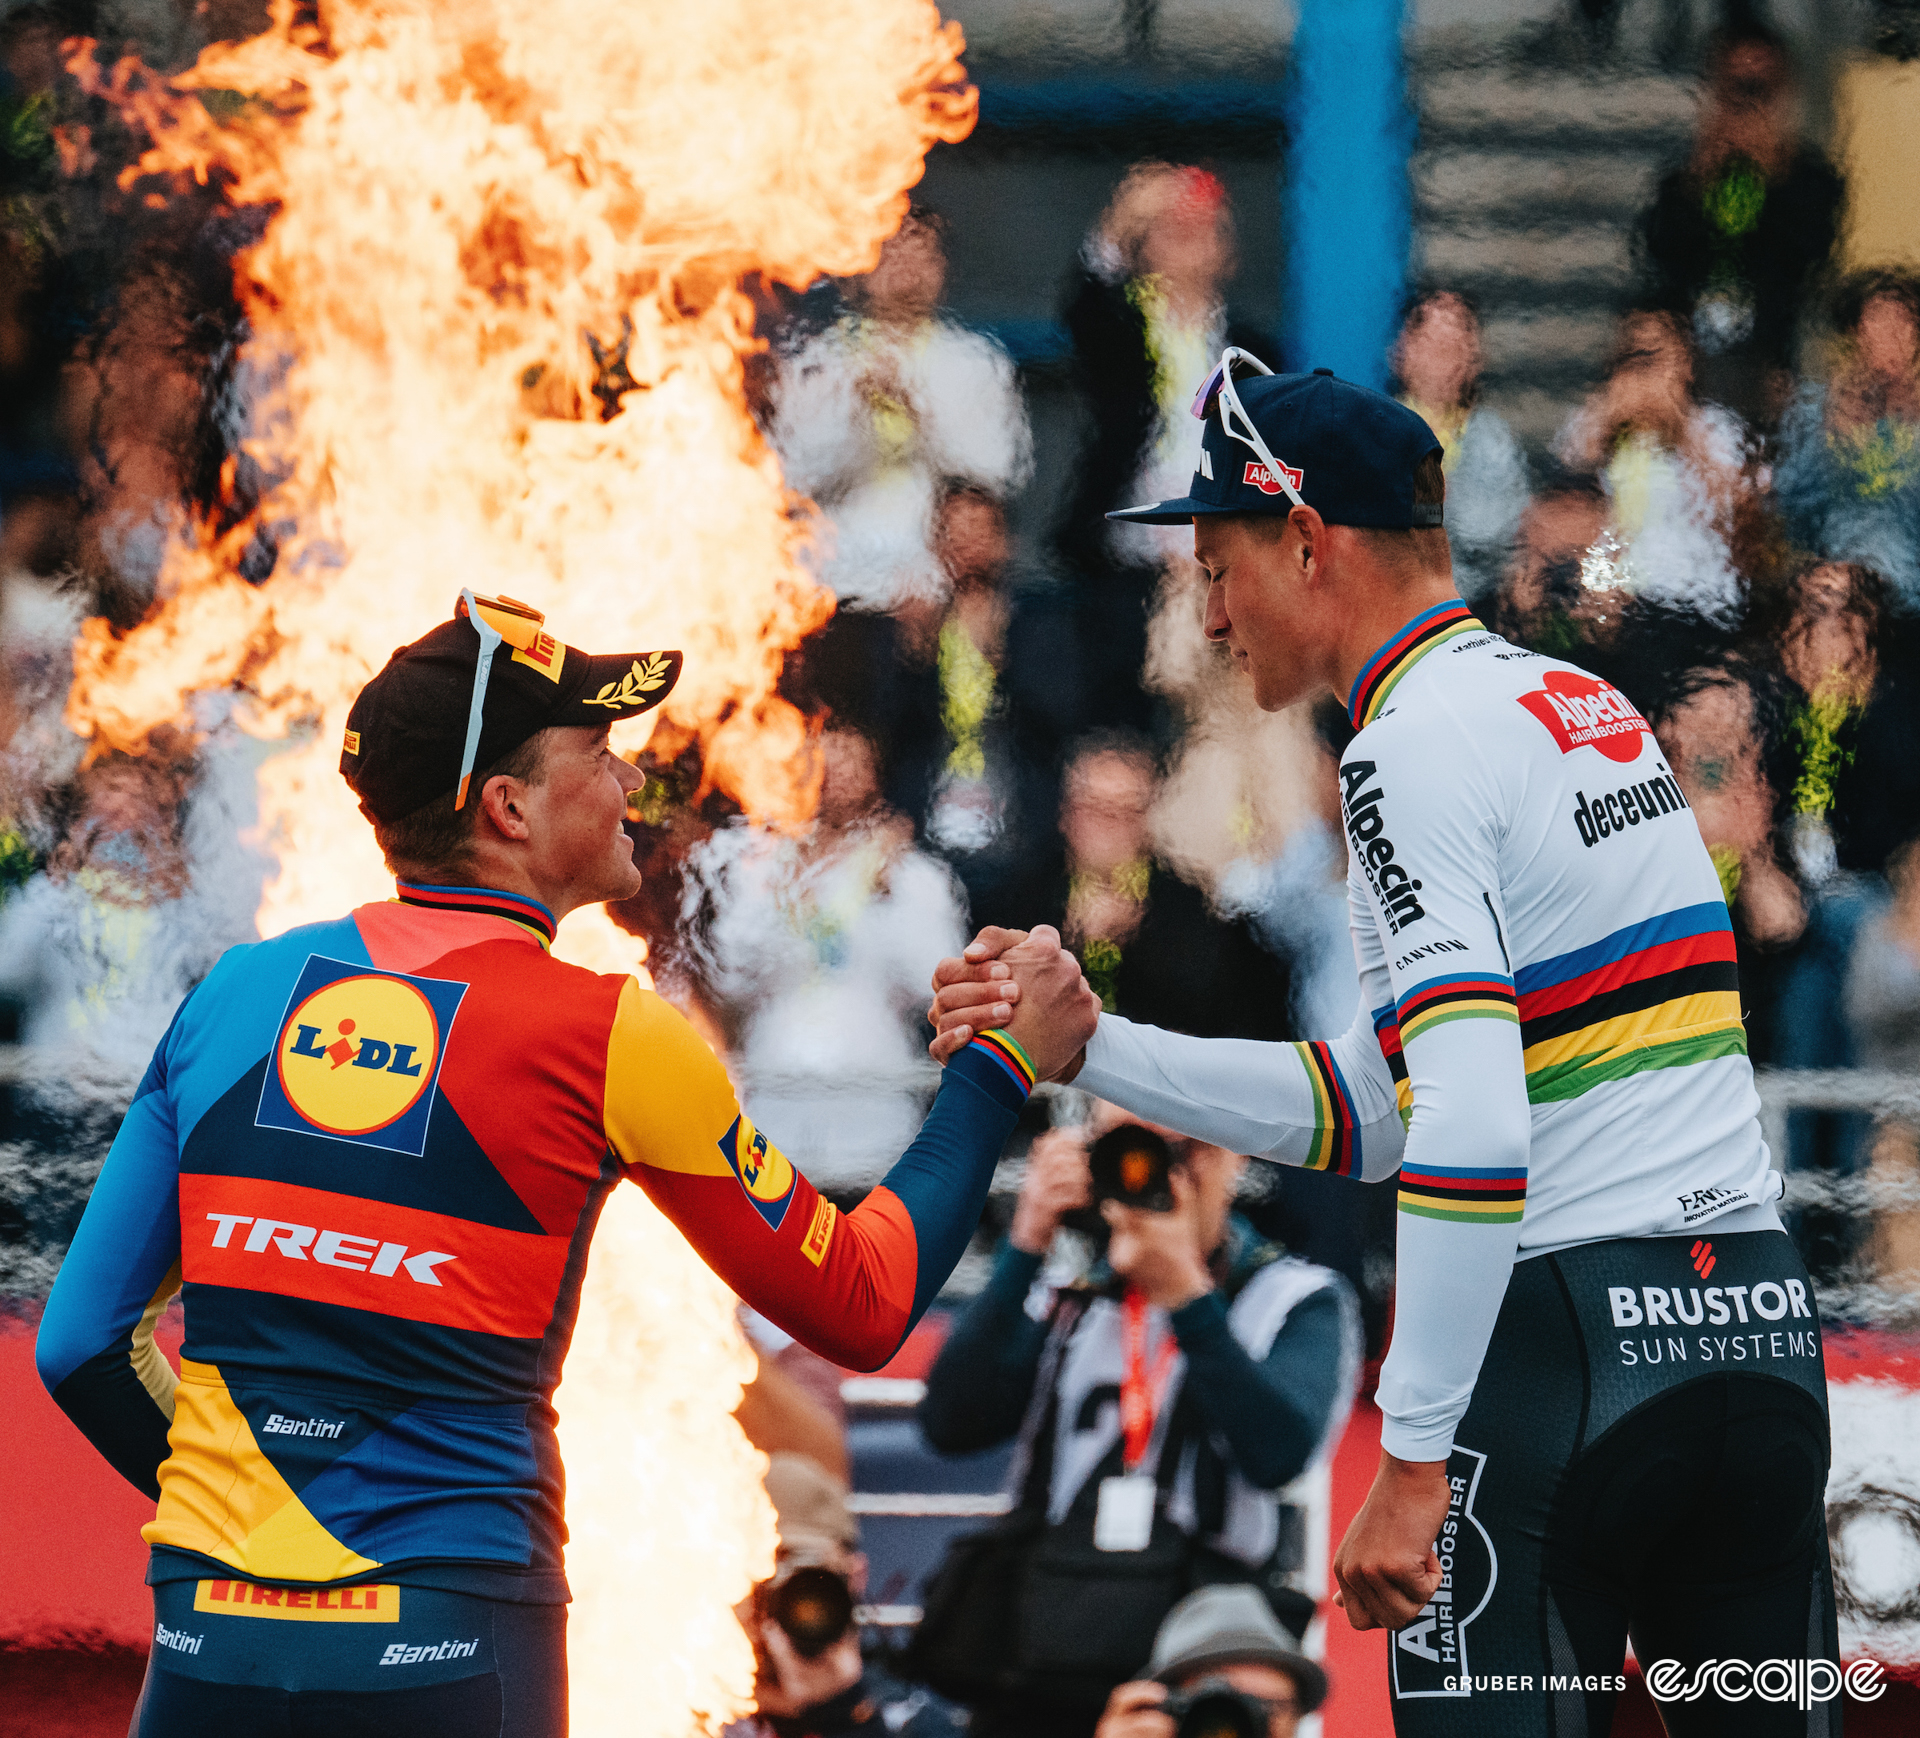 Mathieu van der Poel shakes hands with Mads Pedersen on the Paris-Roubaix podium. In front of them, flames spark from a pipe in the base of the stage and the crowd behind them shimmers in the heat-distorted air.